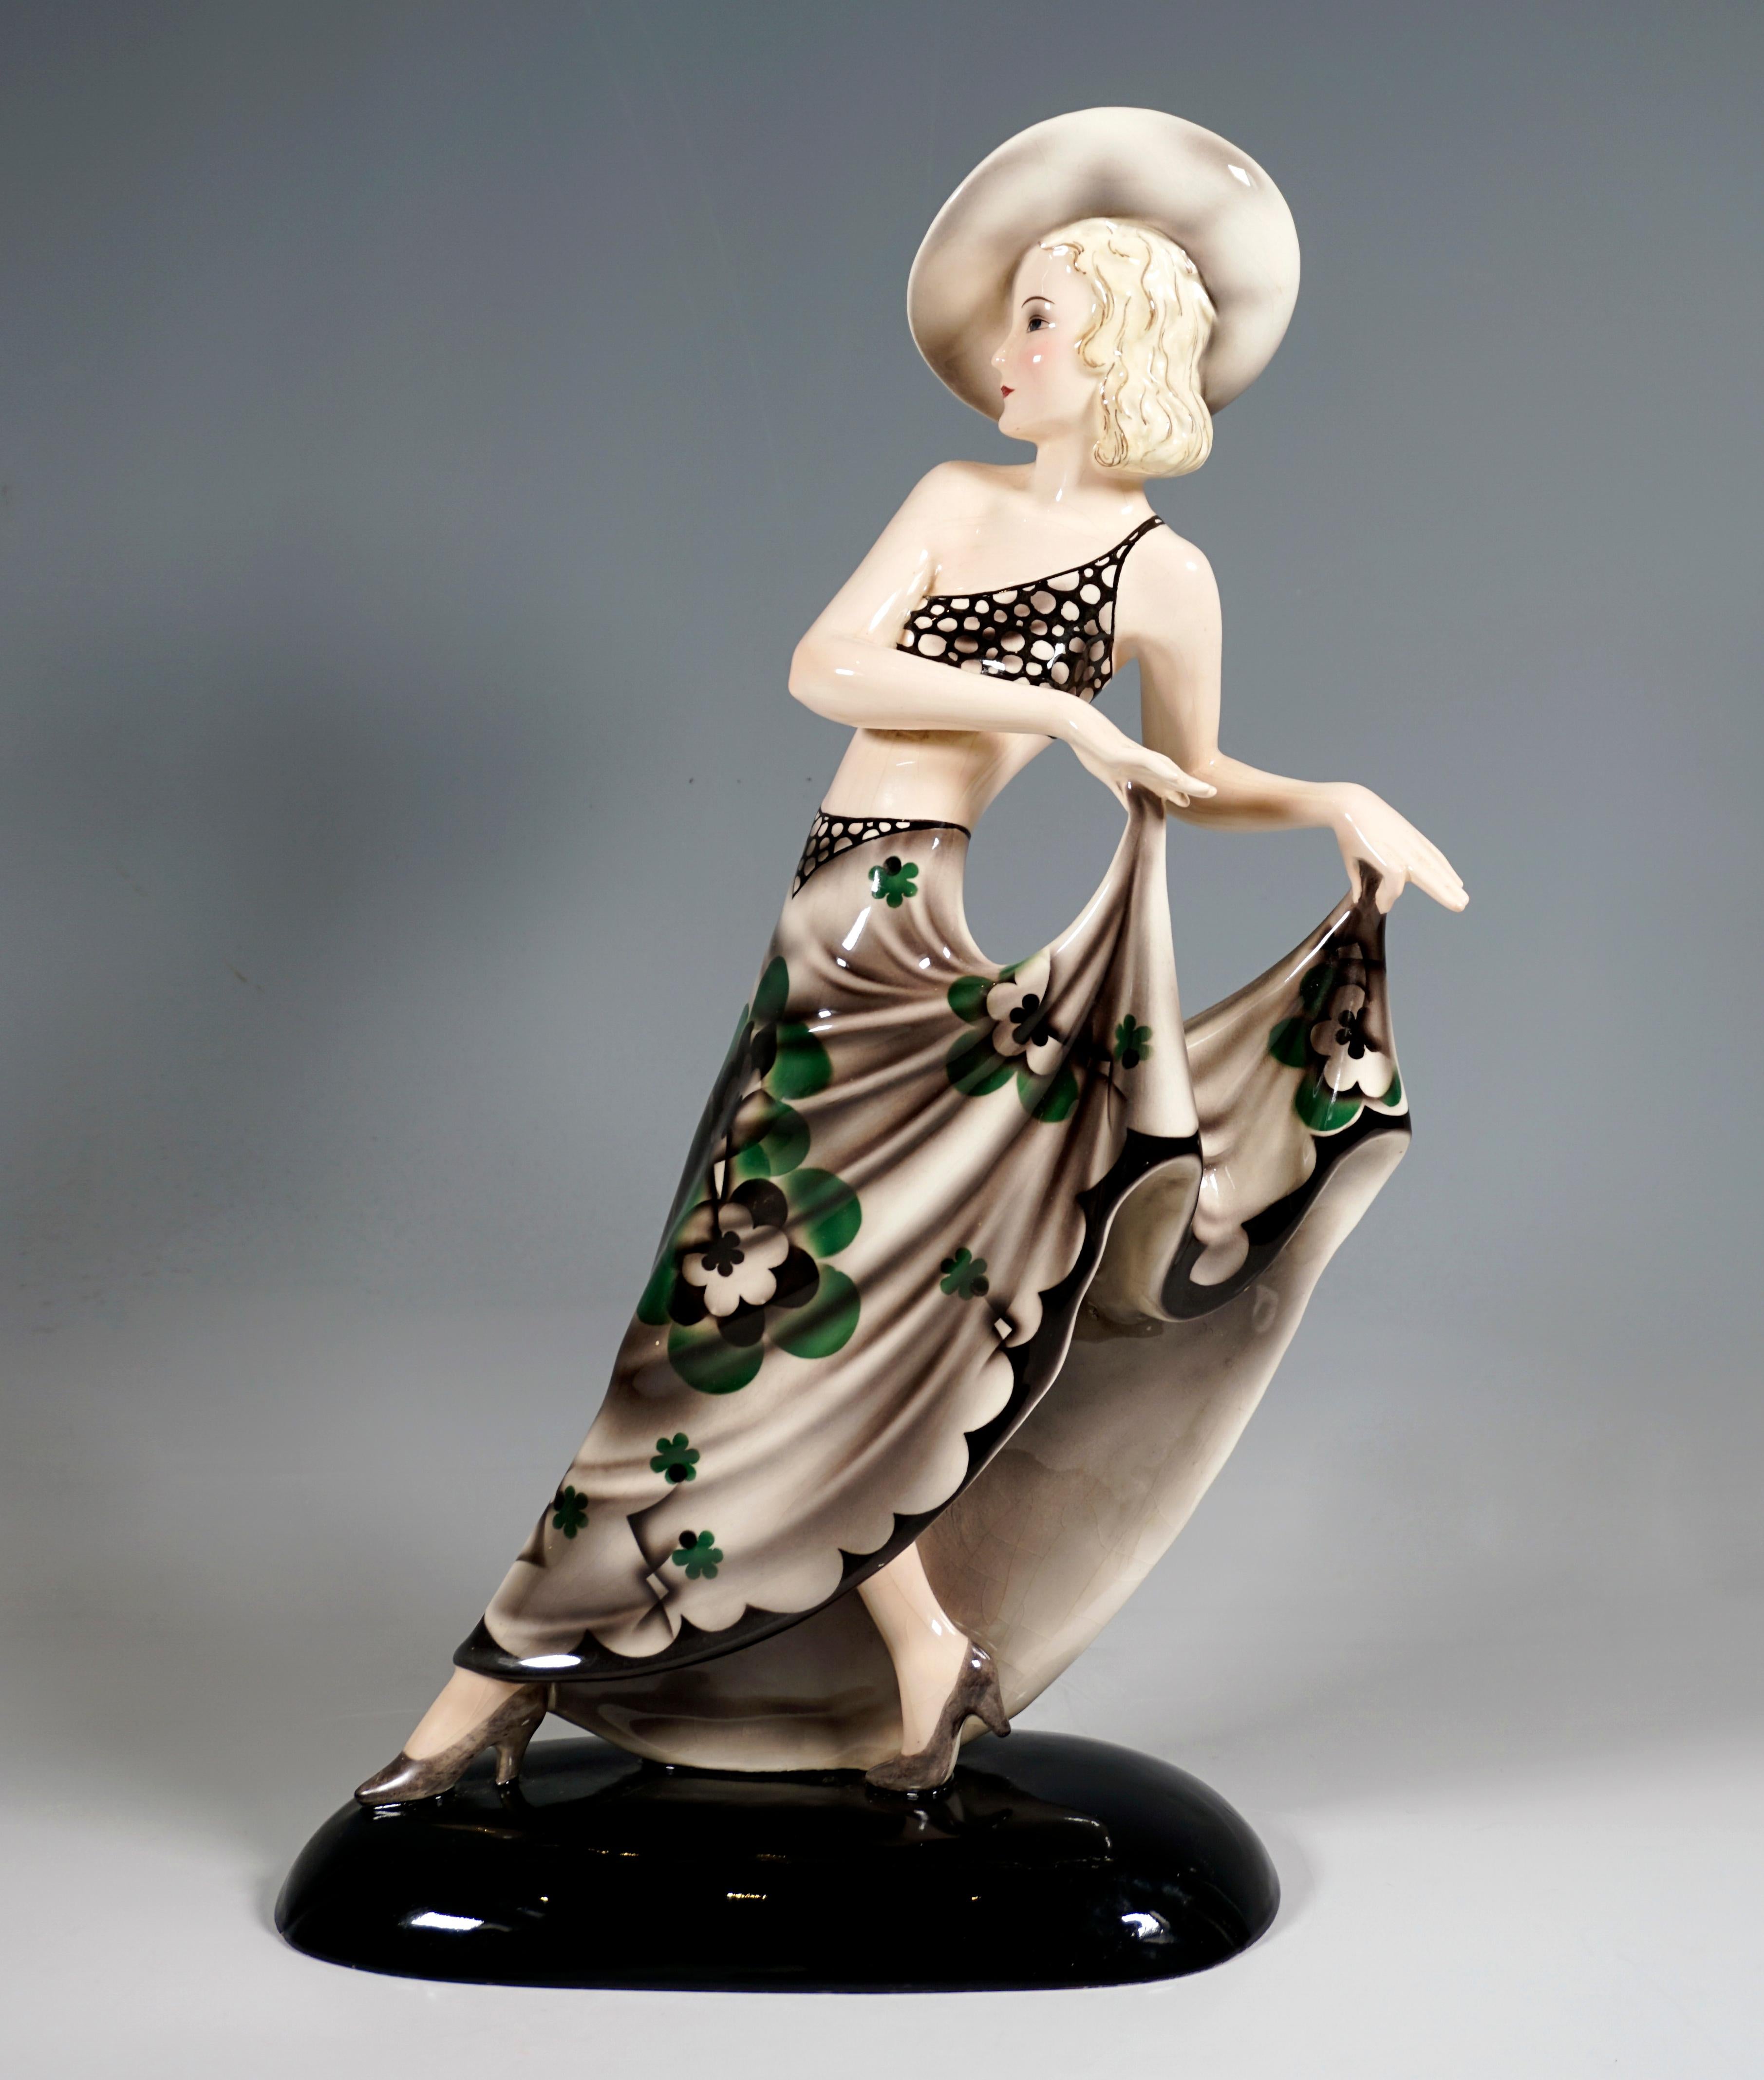 Excellent art ceramic figurine from the 1930s:
Striding young lady with a cropped, delicate top and a large hat, holding up the long, wide skirt with a stylized floral pattern with both hands.
On a black oval base, artist's signature 'Dakon' on